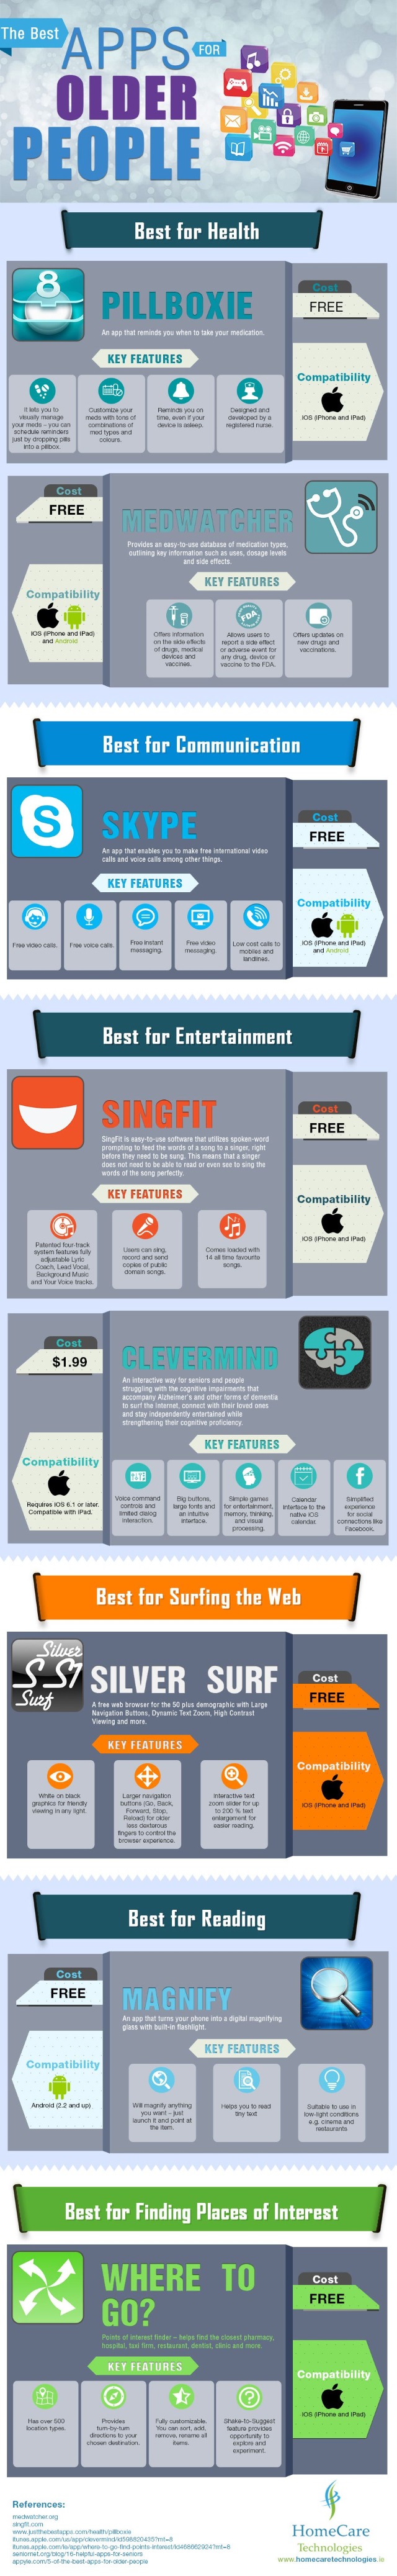 Apps-for-older-people-infographic640